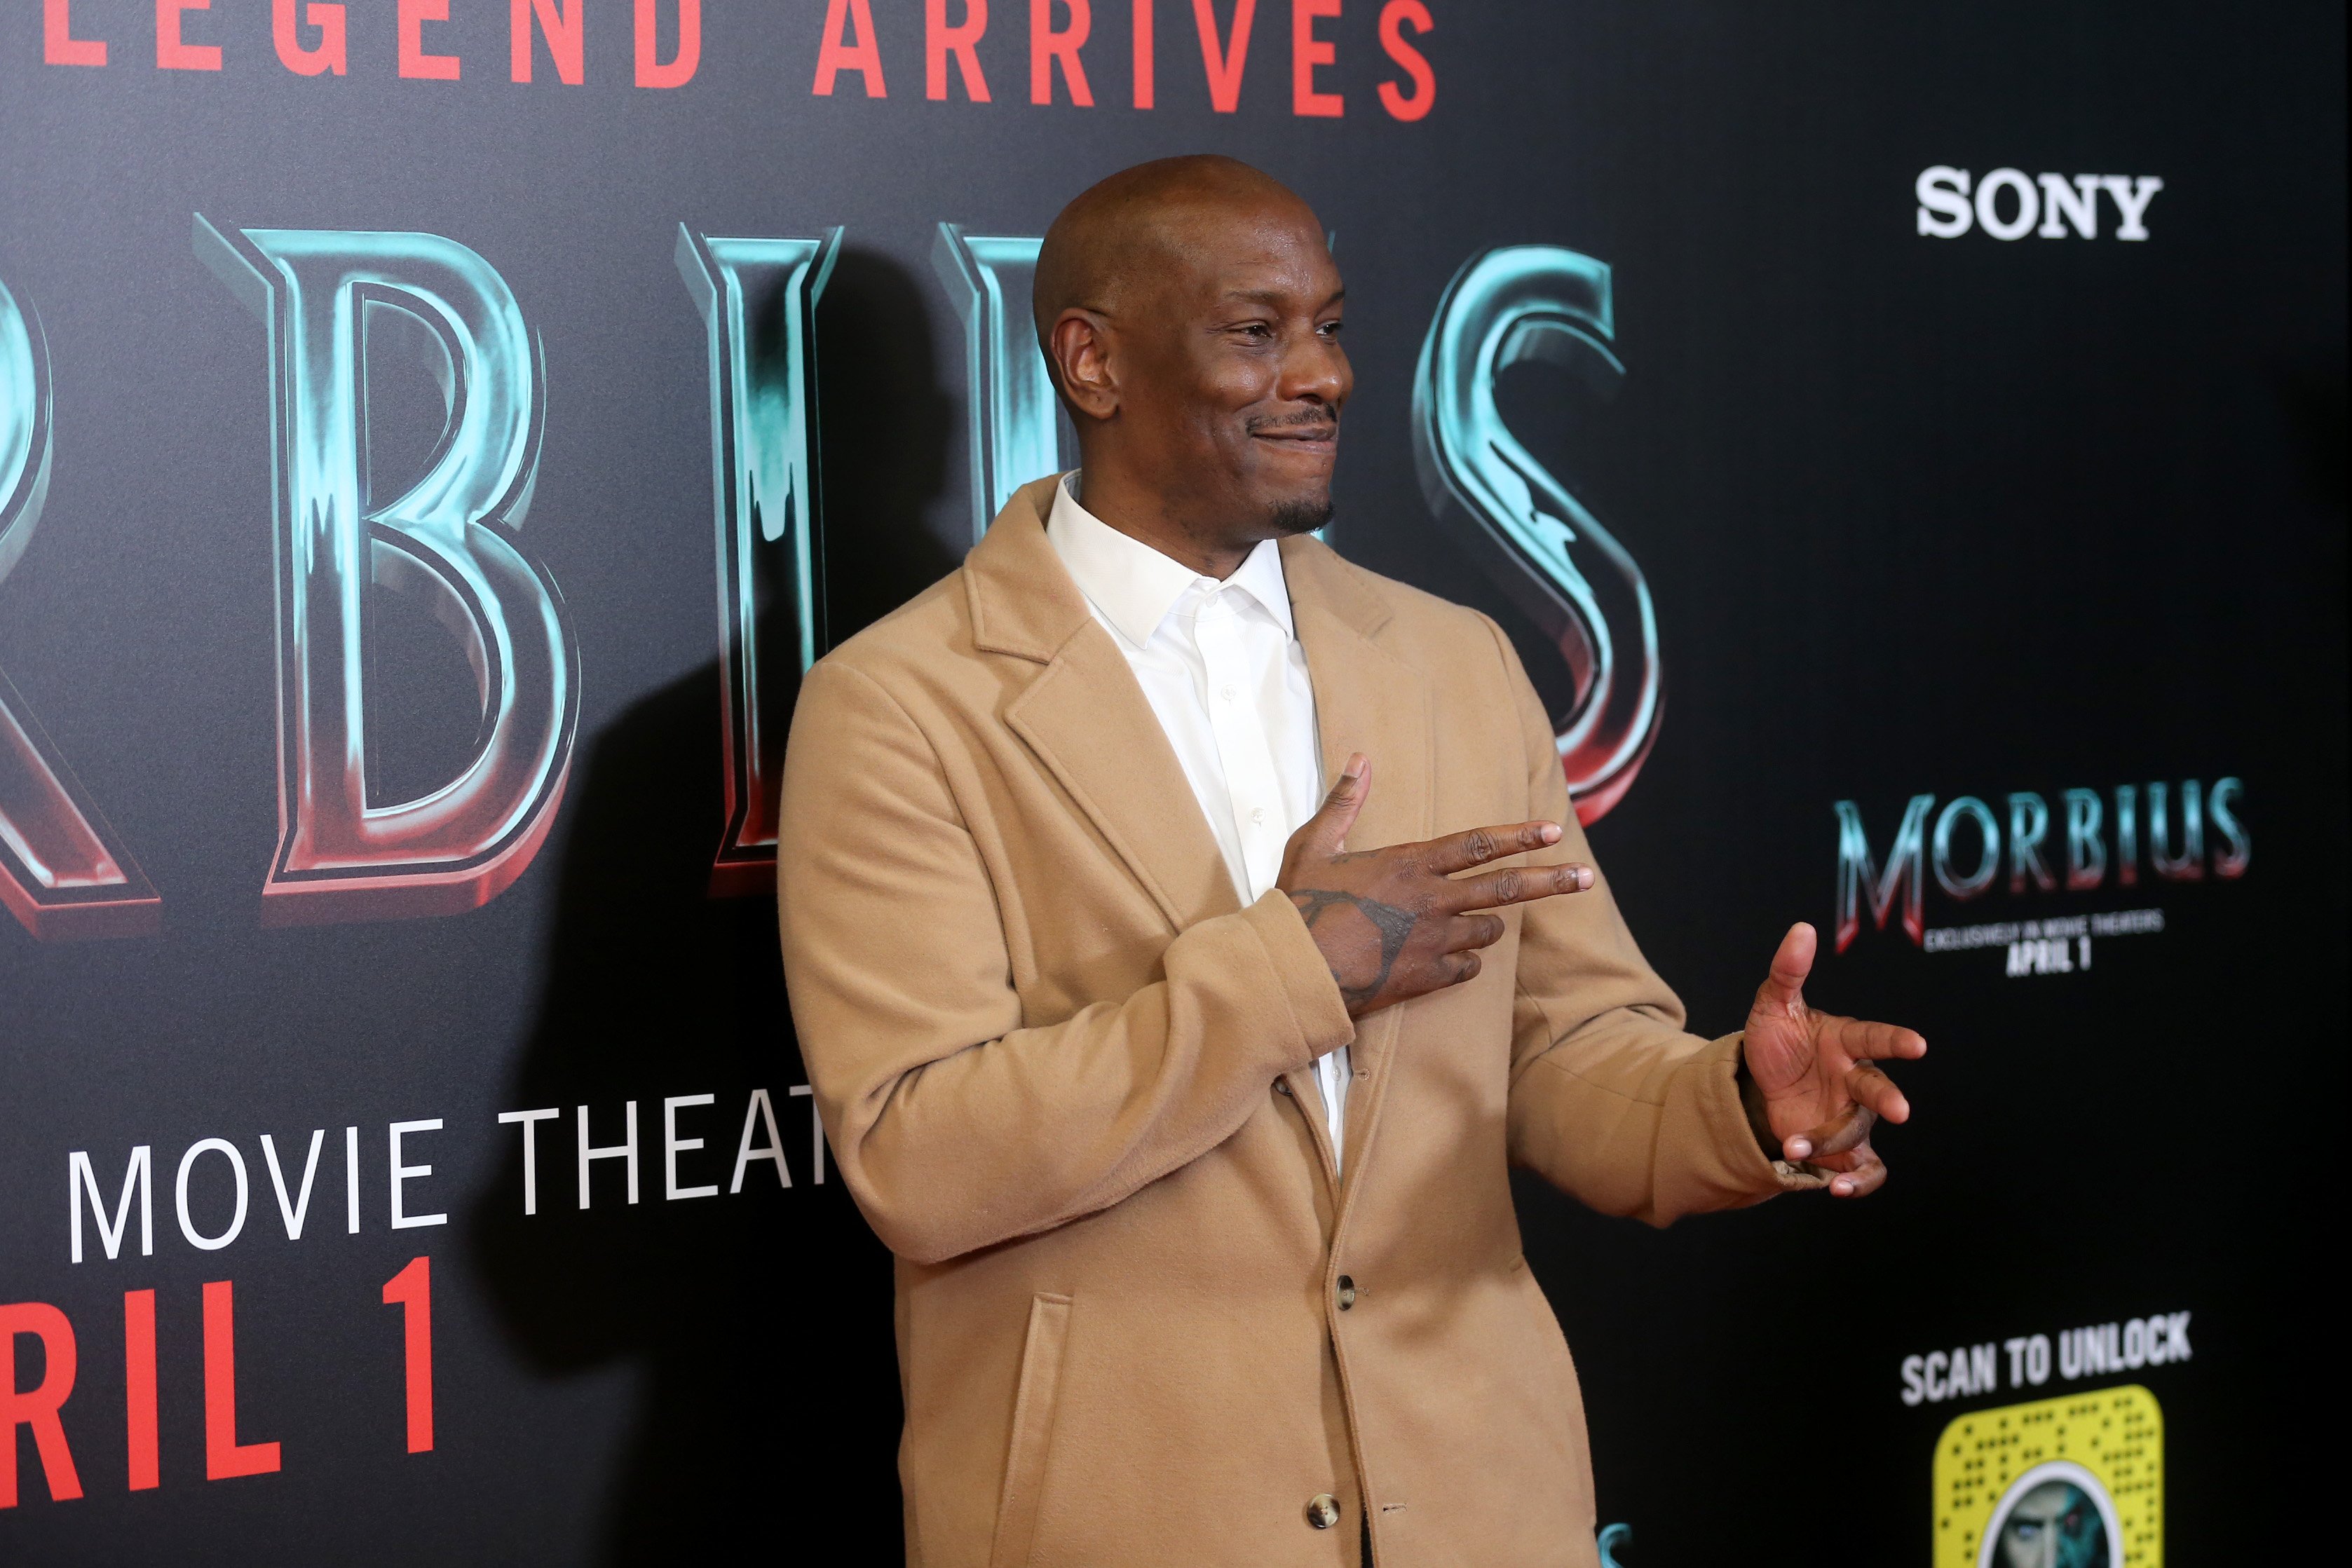 Tyrese Gibson poses at the "Morbius" Fan Special Screening at Cinemark Playa Vista and XD on March 30, 2022, in Los Angeles, California | Source: Getty Images